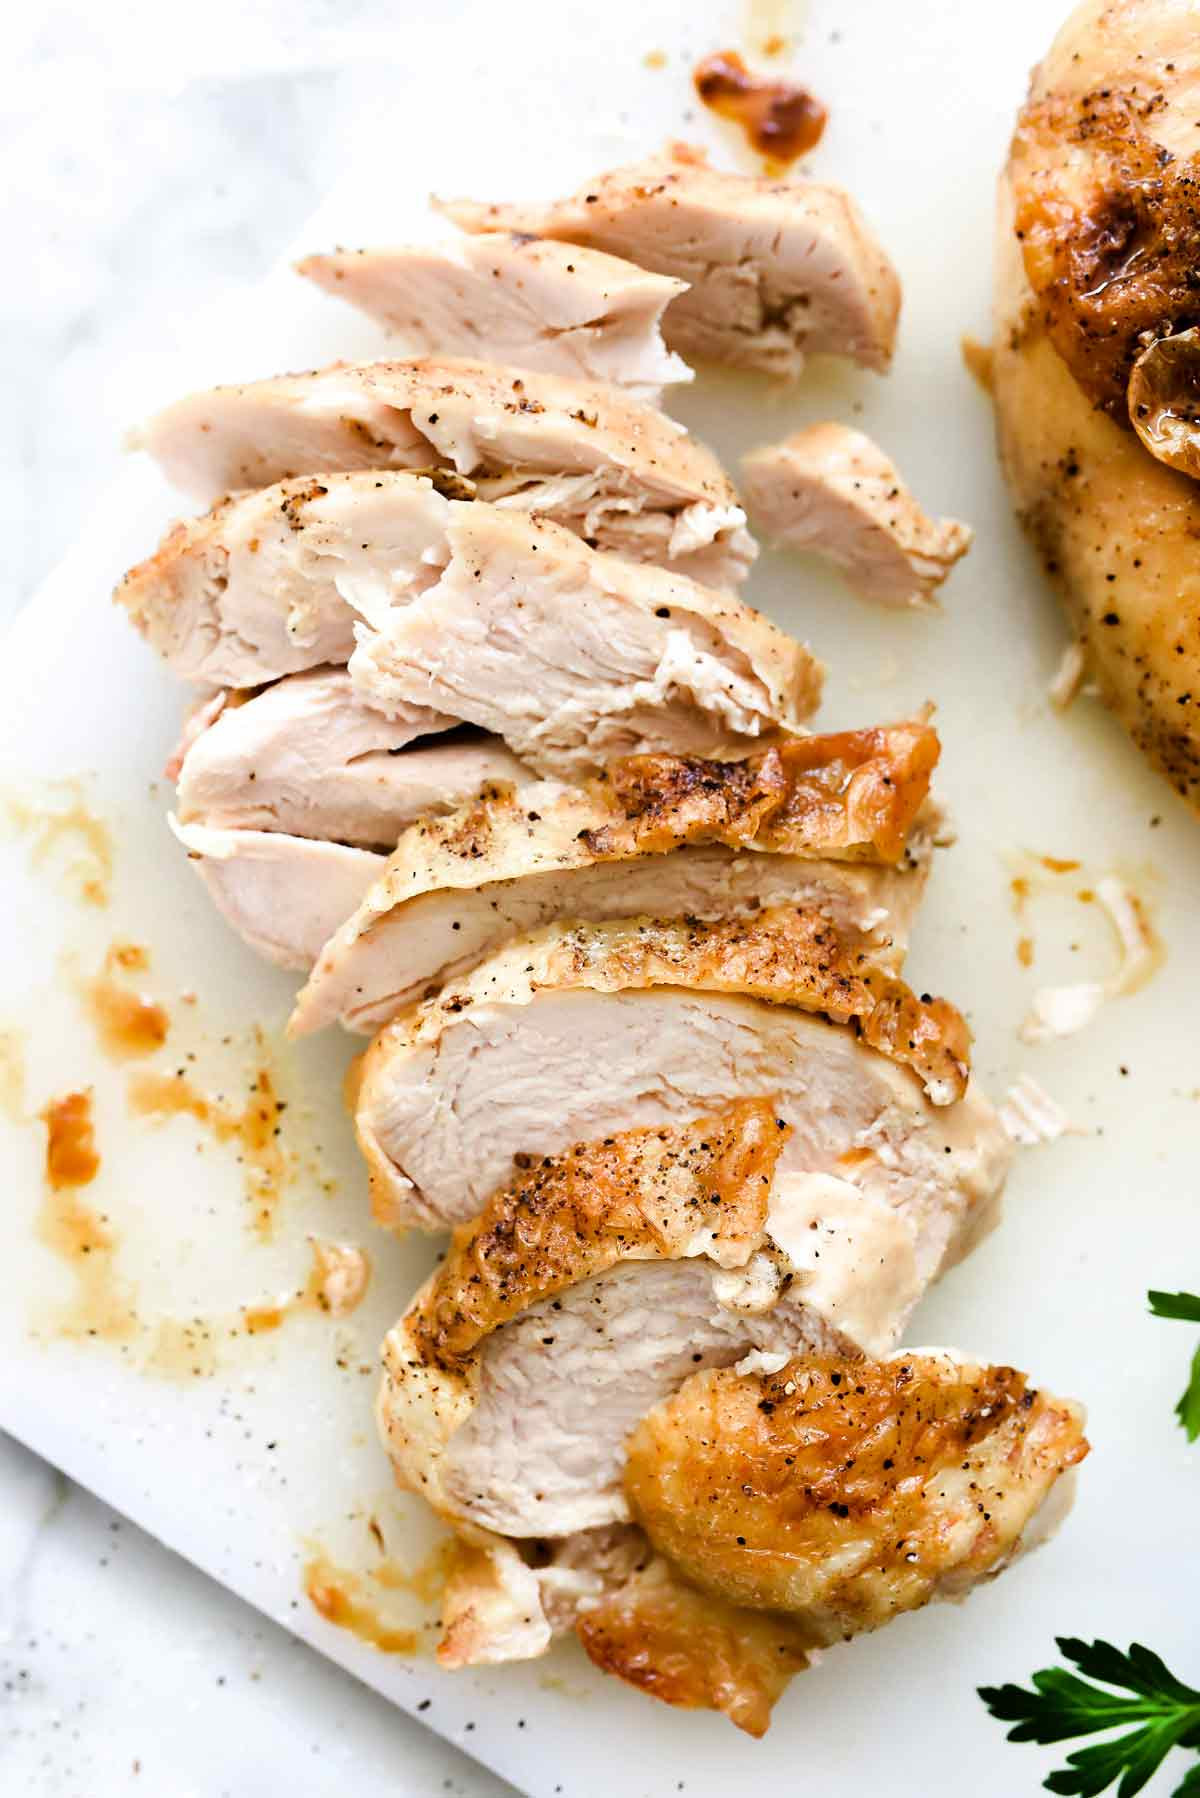 Chicken Breasts Recipes
 The Best Baked Chicken Breast Recipe So Juicy